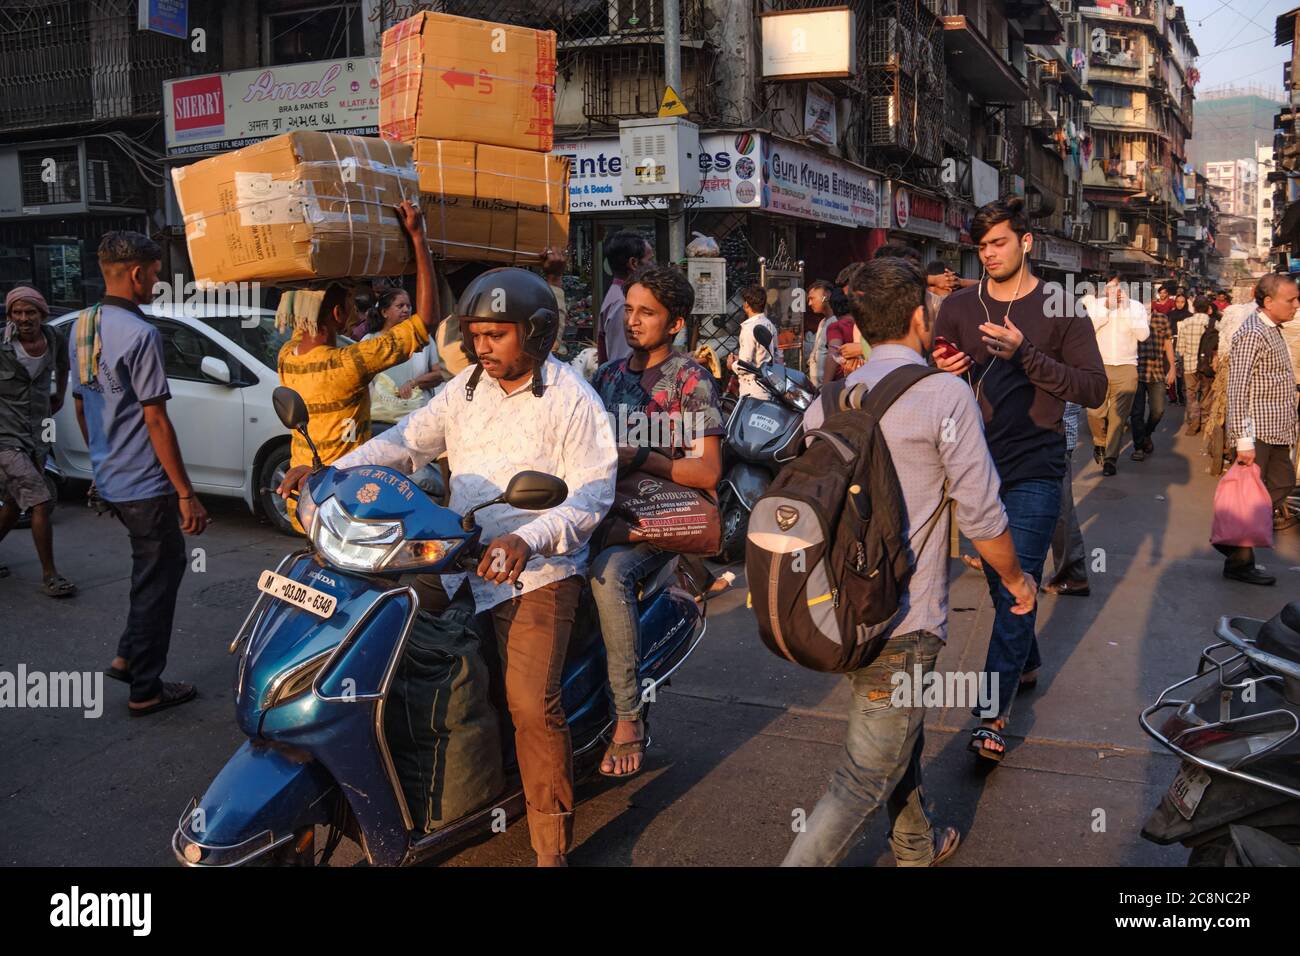 A man steers his motorcycle through busy Kalbadevi Road in Bhuleshwar, Mumbai, India, past porters with goods on their heads and numerous pedestrians Stock Photo